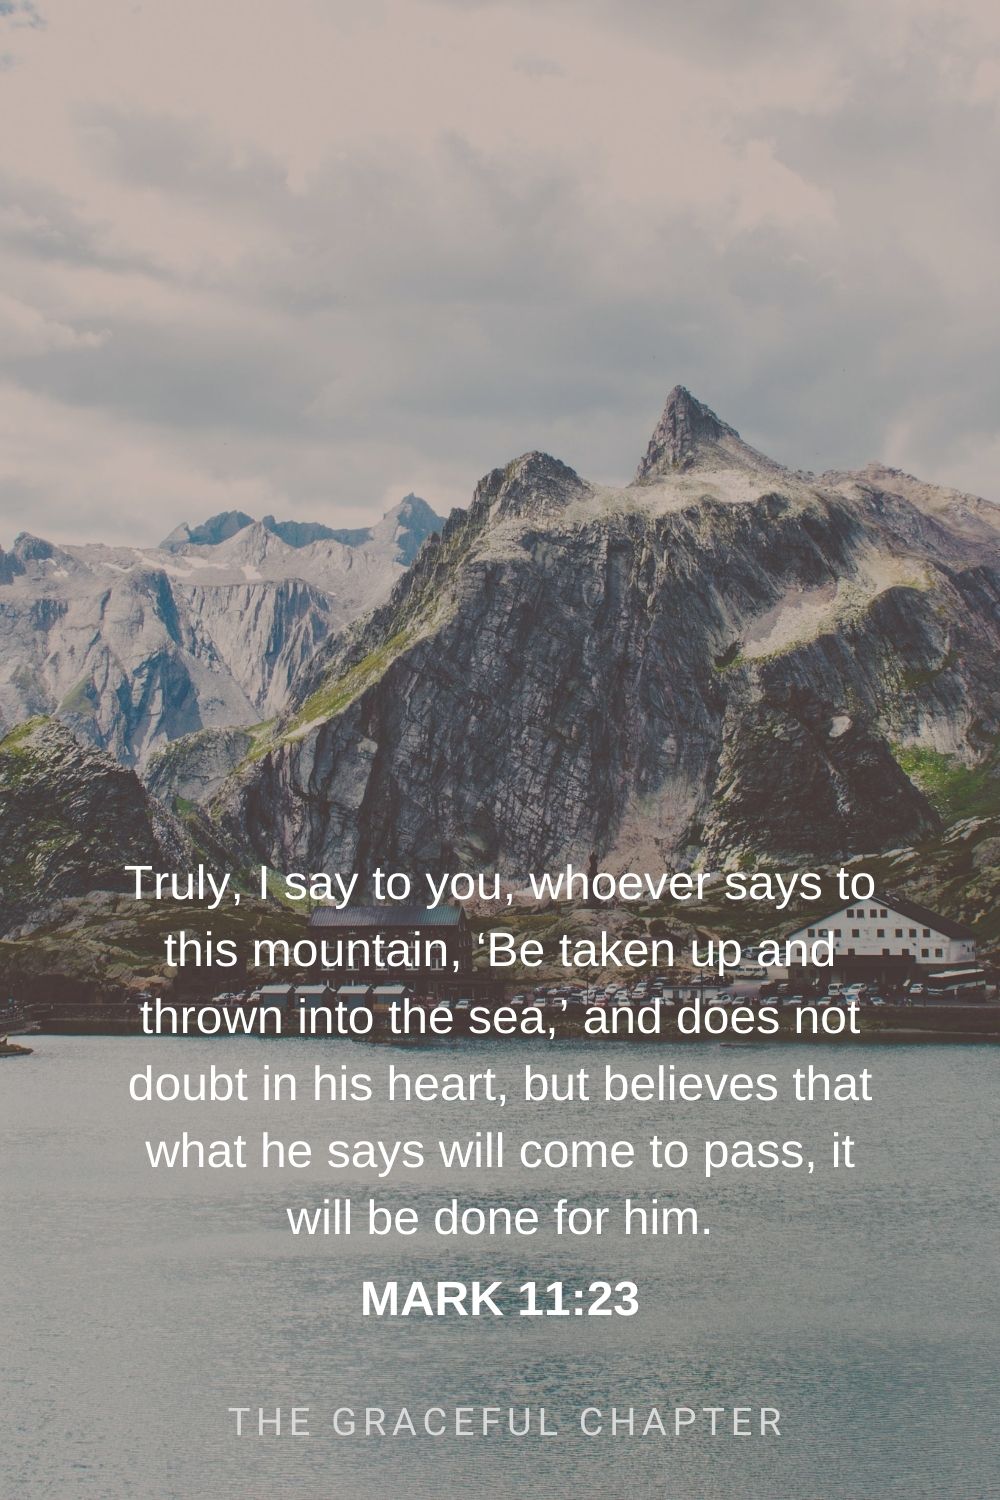 Truly, I say to you, whoever says to this mountain, ‘Be taken up and thrown into the sea,’ and does not doubt in his heart, but believes that what he says will come to pass, it will be done for him. Mark 11:23